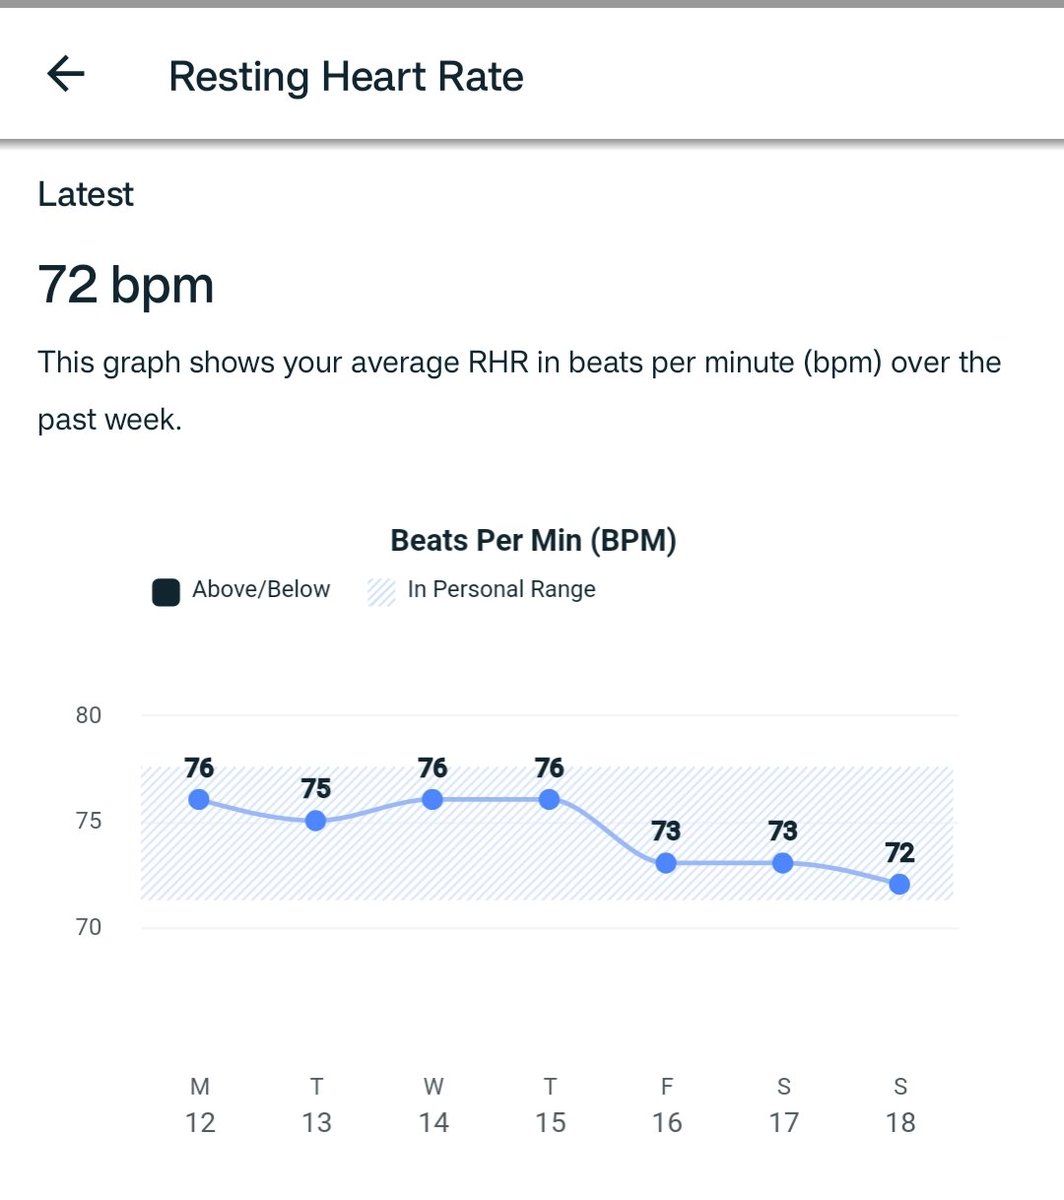 #TheNicotineTest day 10, 11 & 12
Phase two - day 2, 3 & 4 without patch

- Neuropathy, POTS, fatigue and brain fog are improving!
- Sleep isn't as deep but still better
- Look at my HRV & RHR after 4 days! 😮 Both have been 🔽 20 & 🔼75 since a bad crash in April.